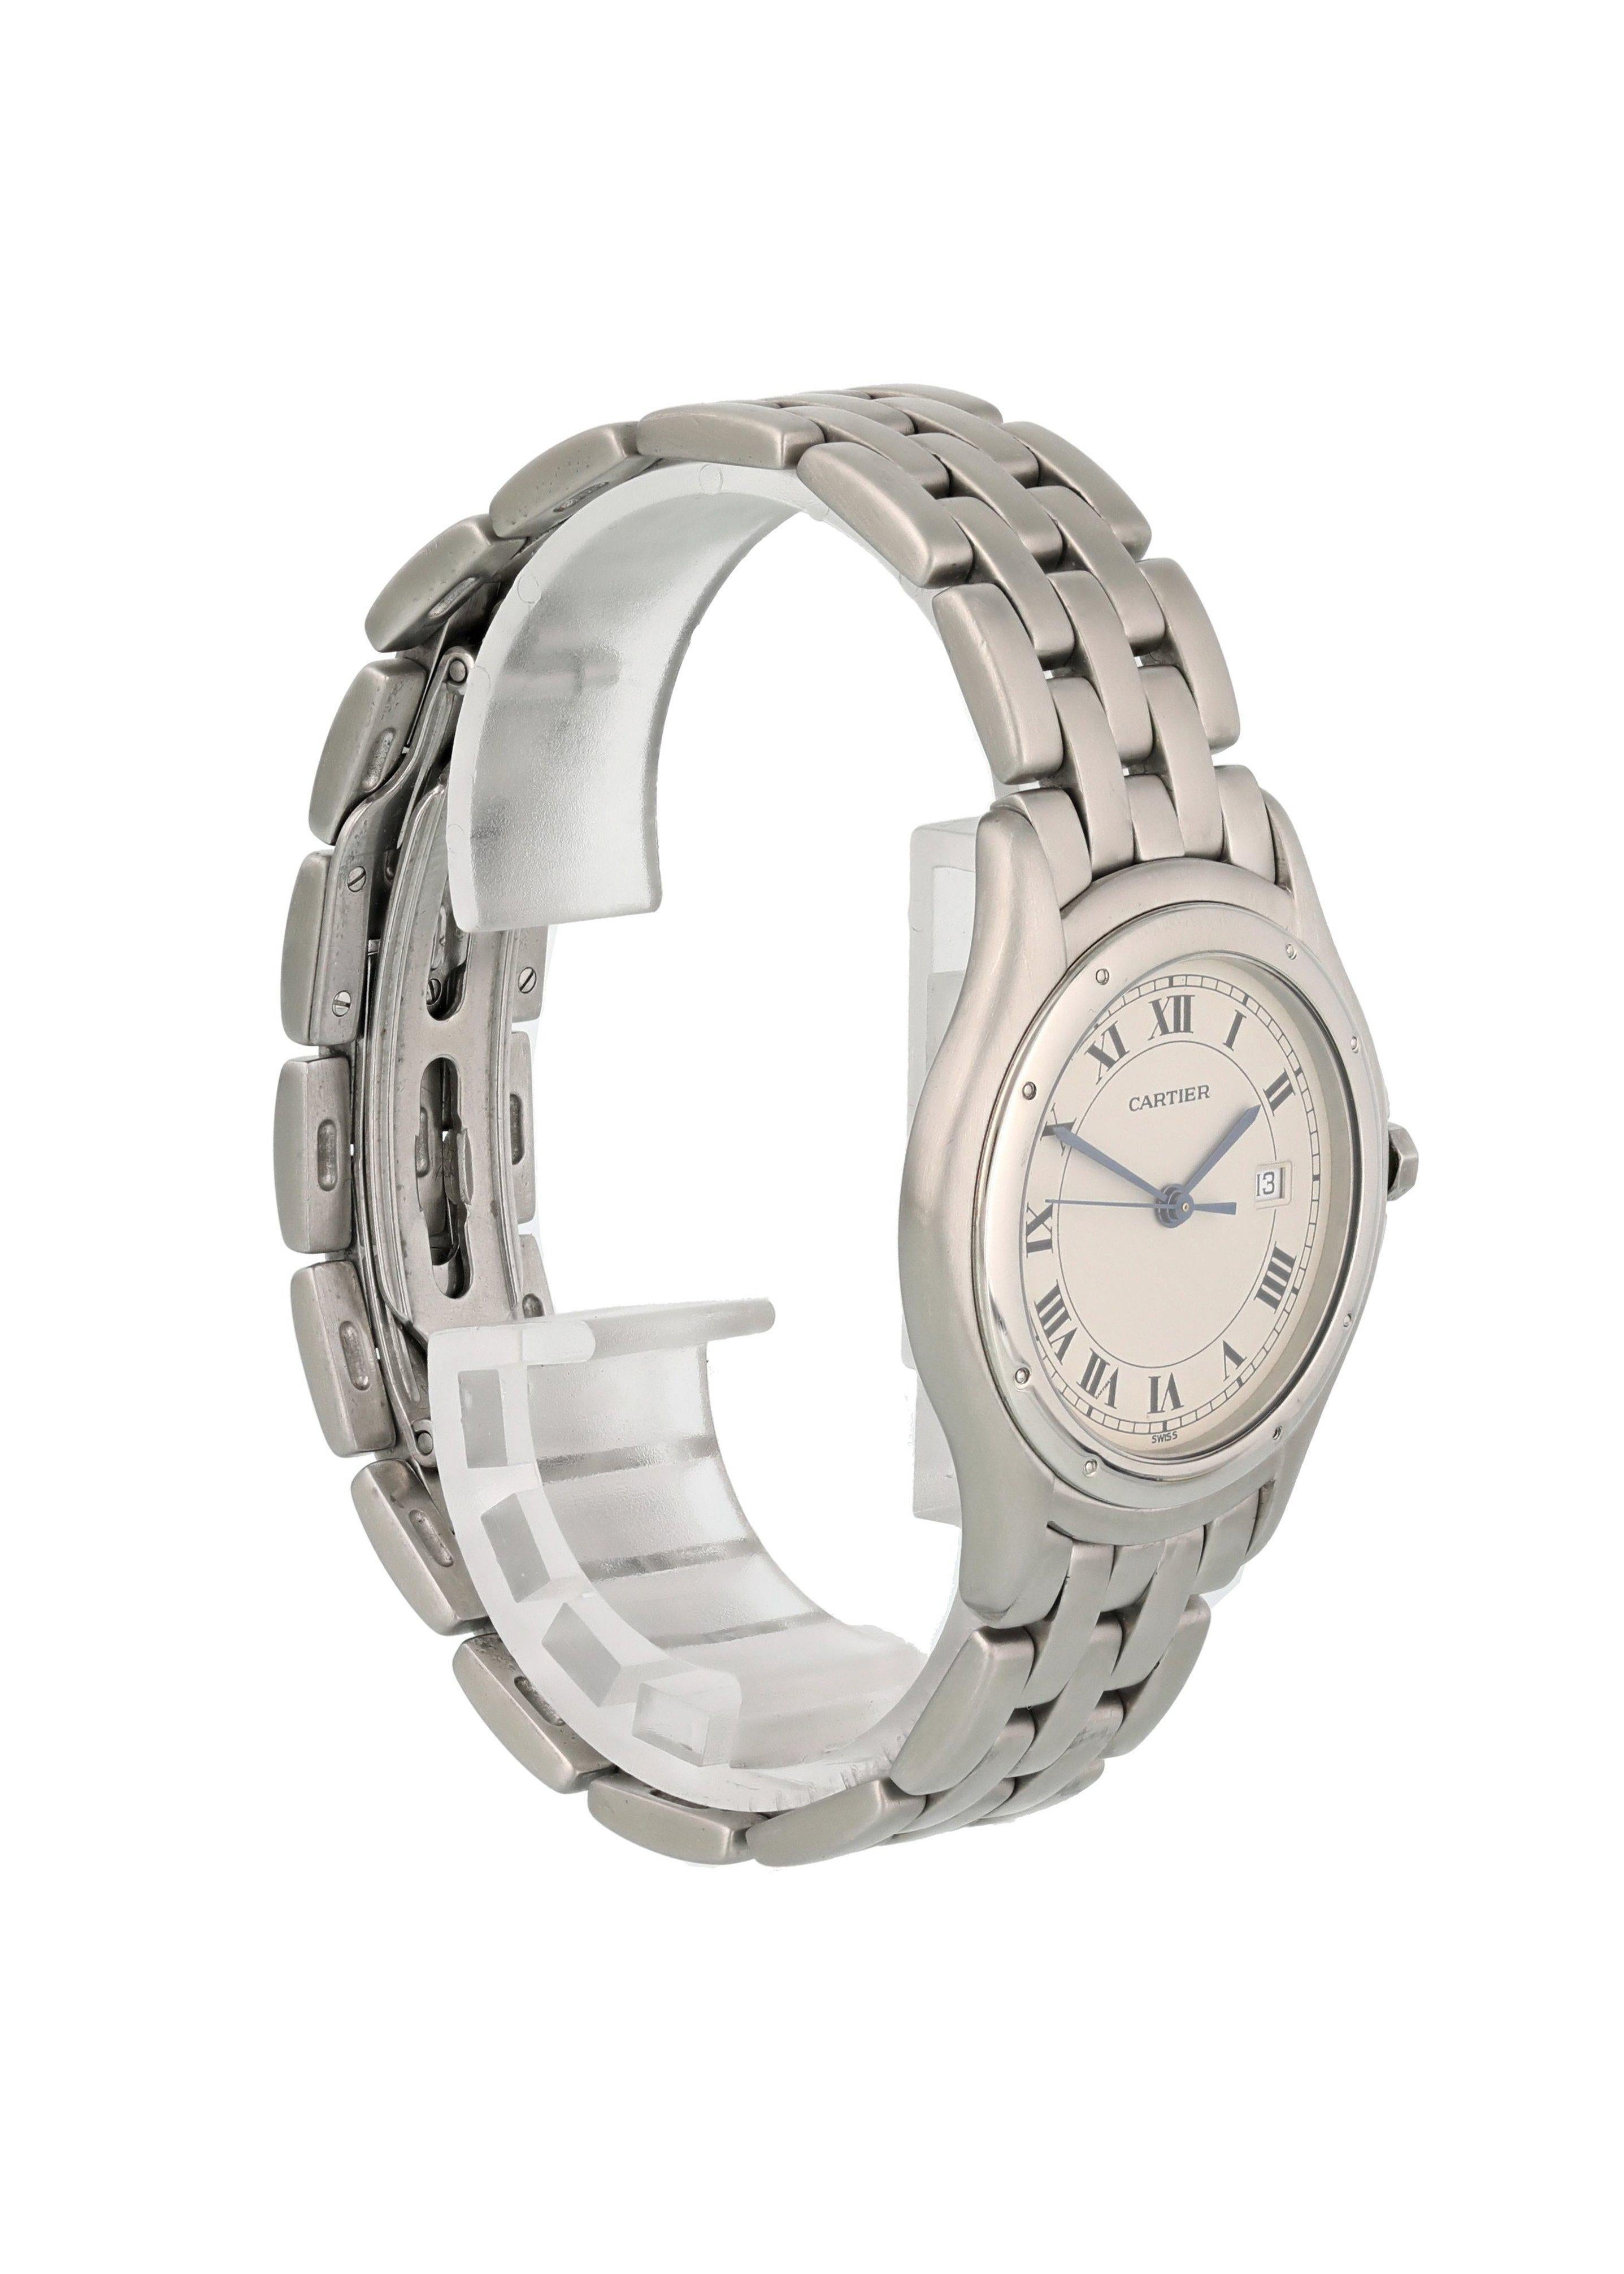 Cartier Cougar 987904 Laides Watch In Excellent Condition For Sale In New York, NY